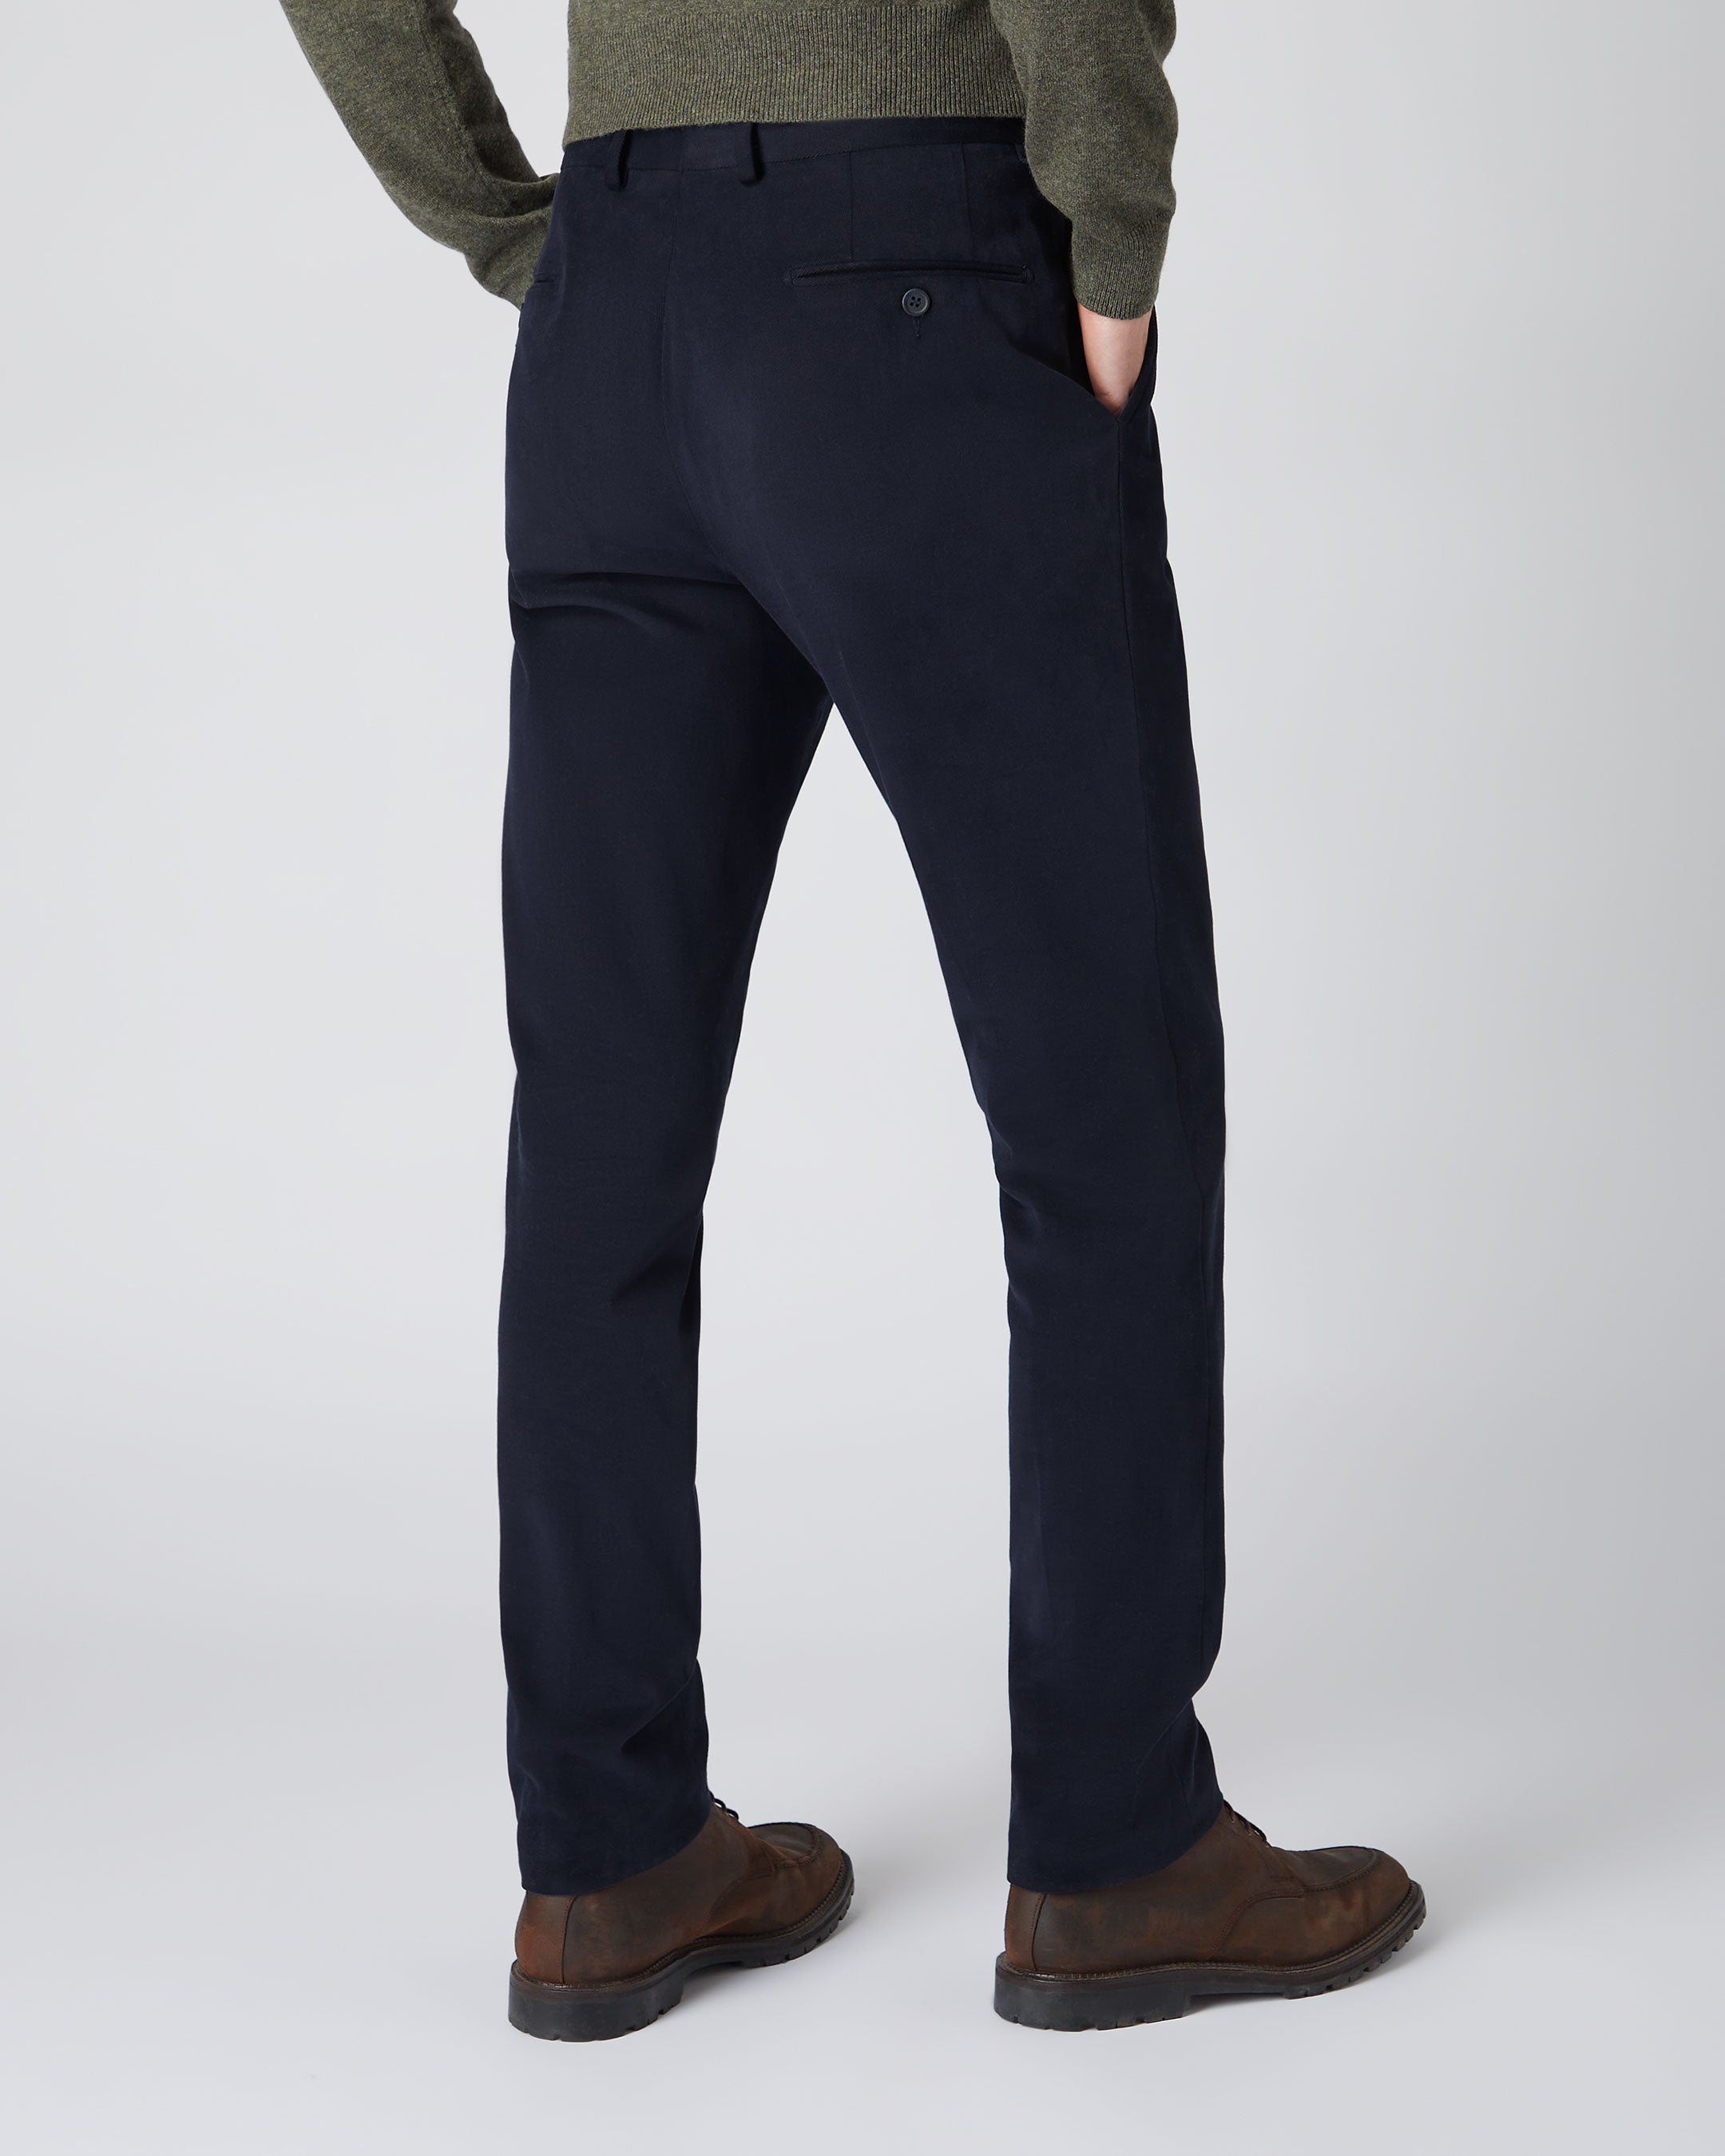 Buy Celio* Charcoal Grey Cotton Regular Fit Trousers for Mens Online @ Tata  CLiQ